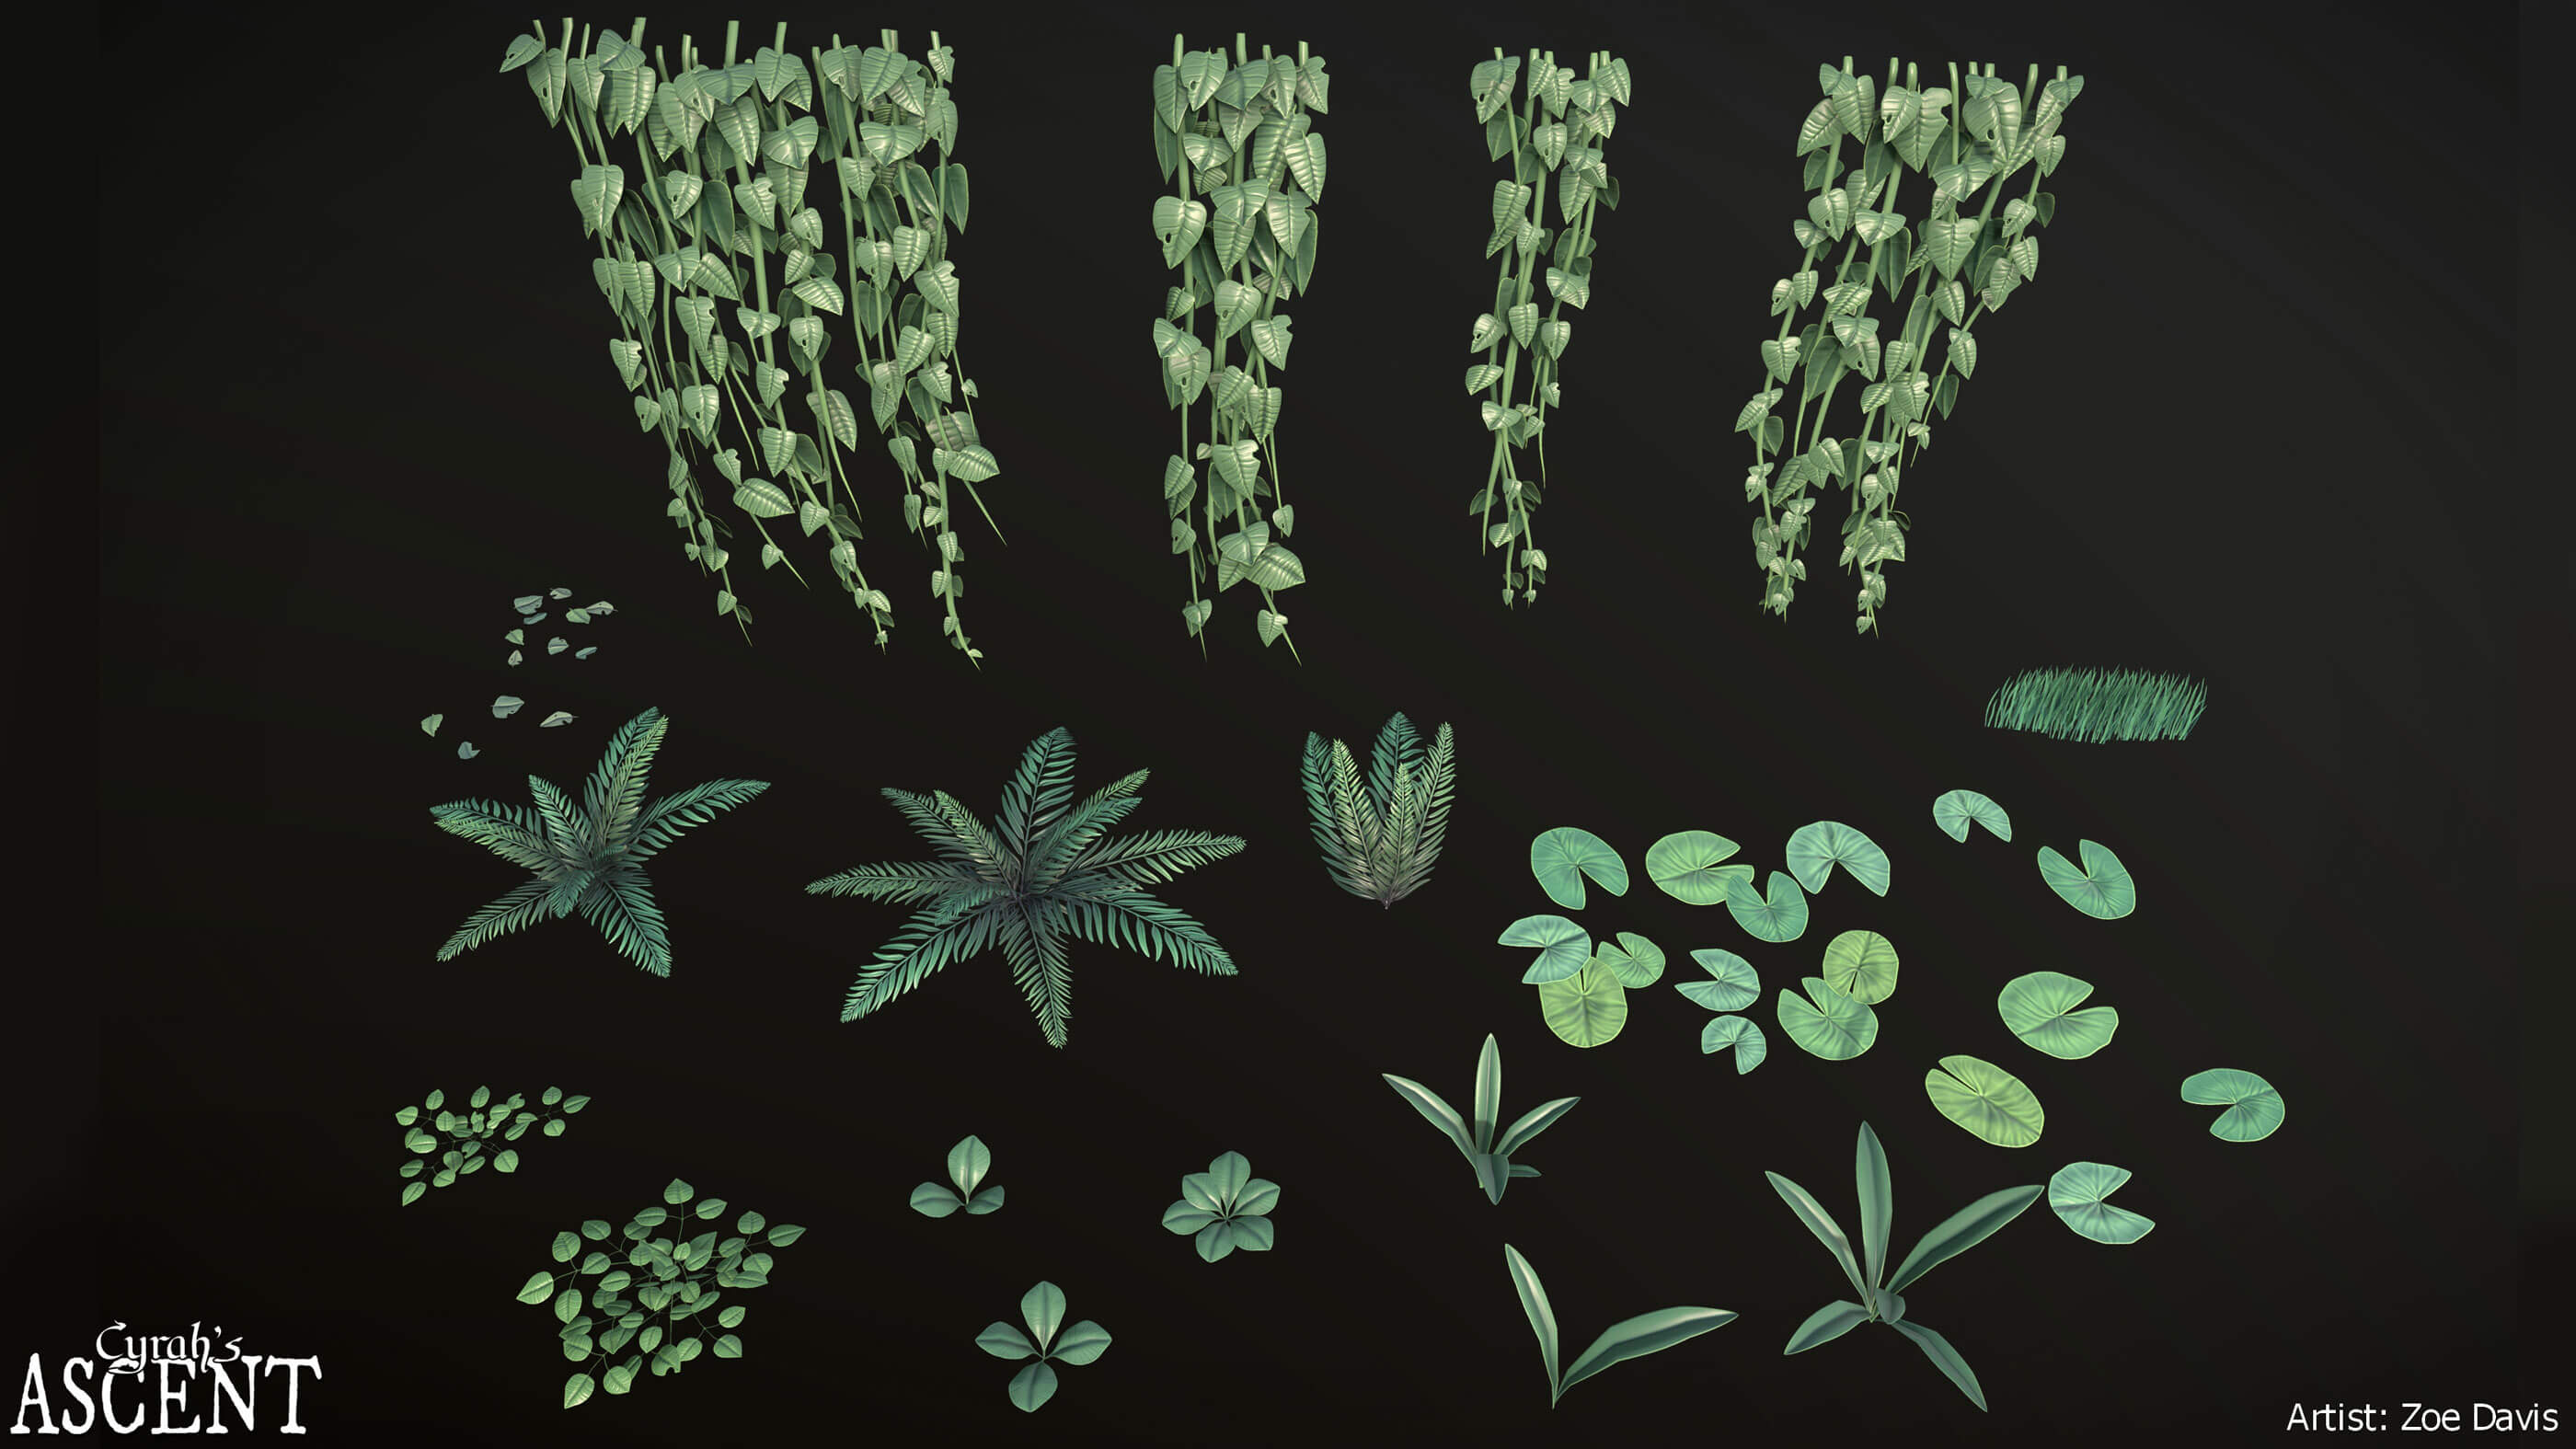 3D models of various plants and ferns.